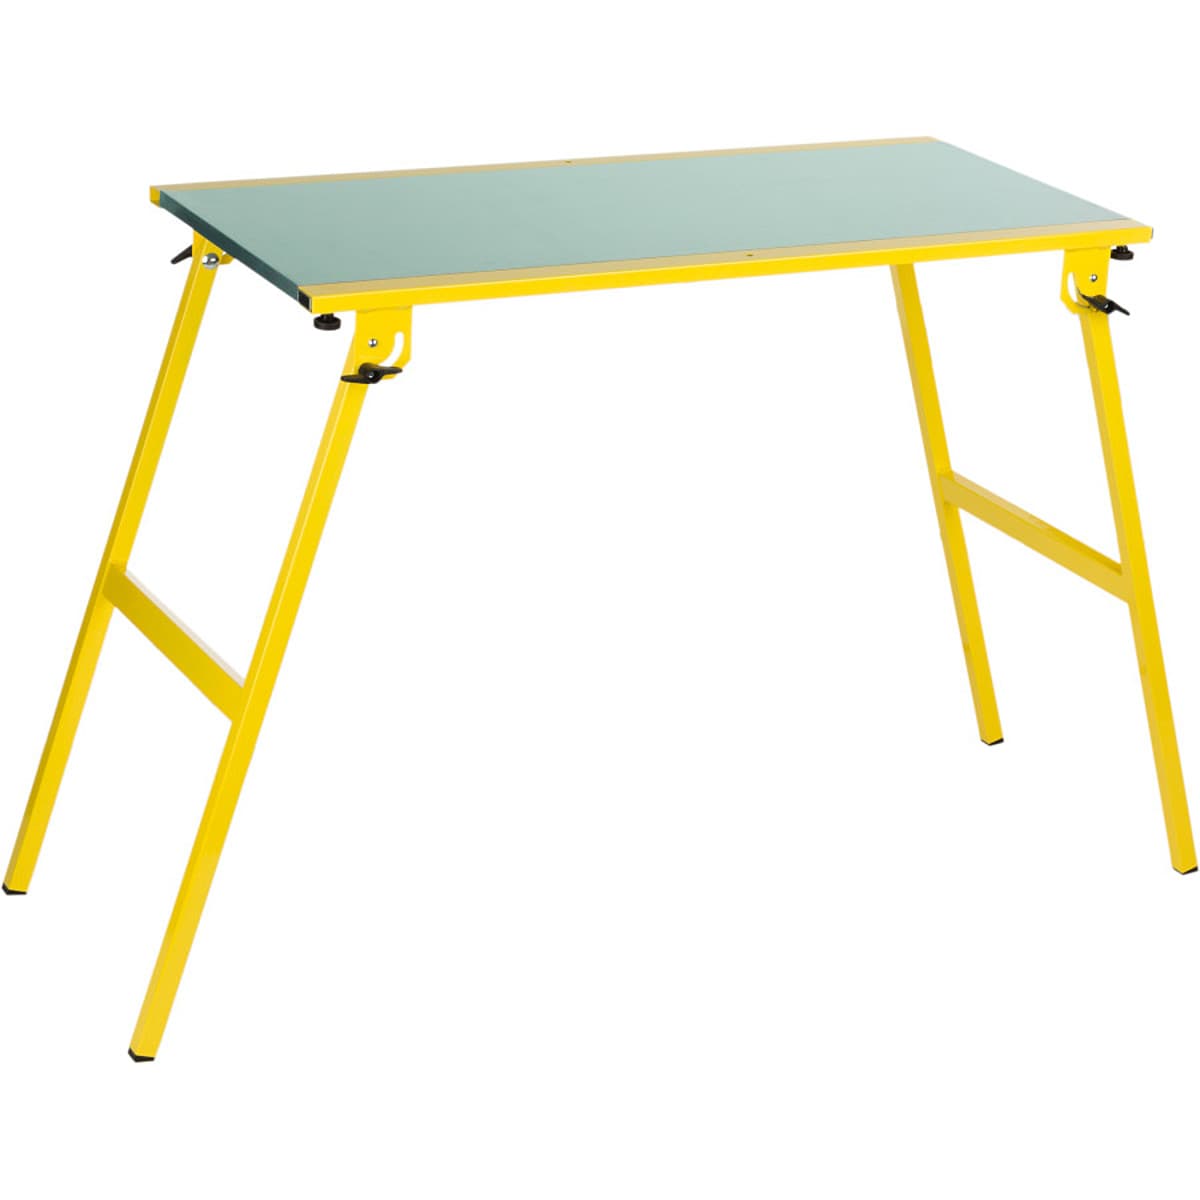 Toko Workbench One Color, 110cm x 50cm